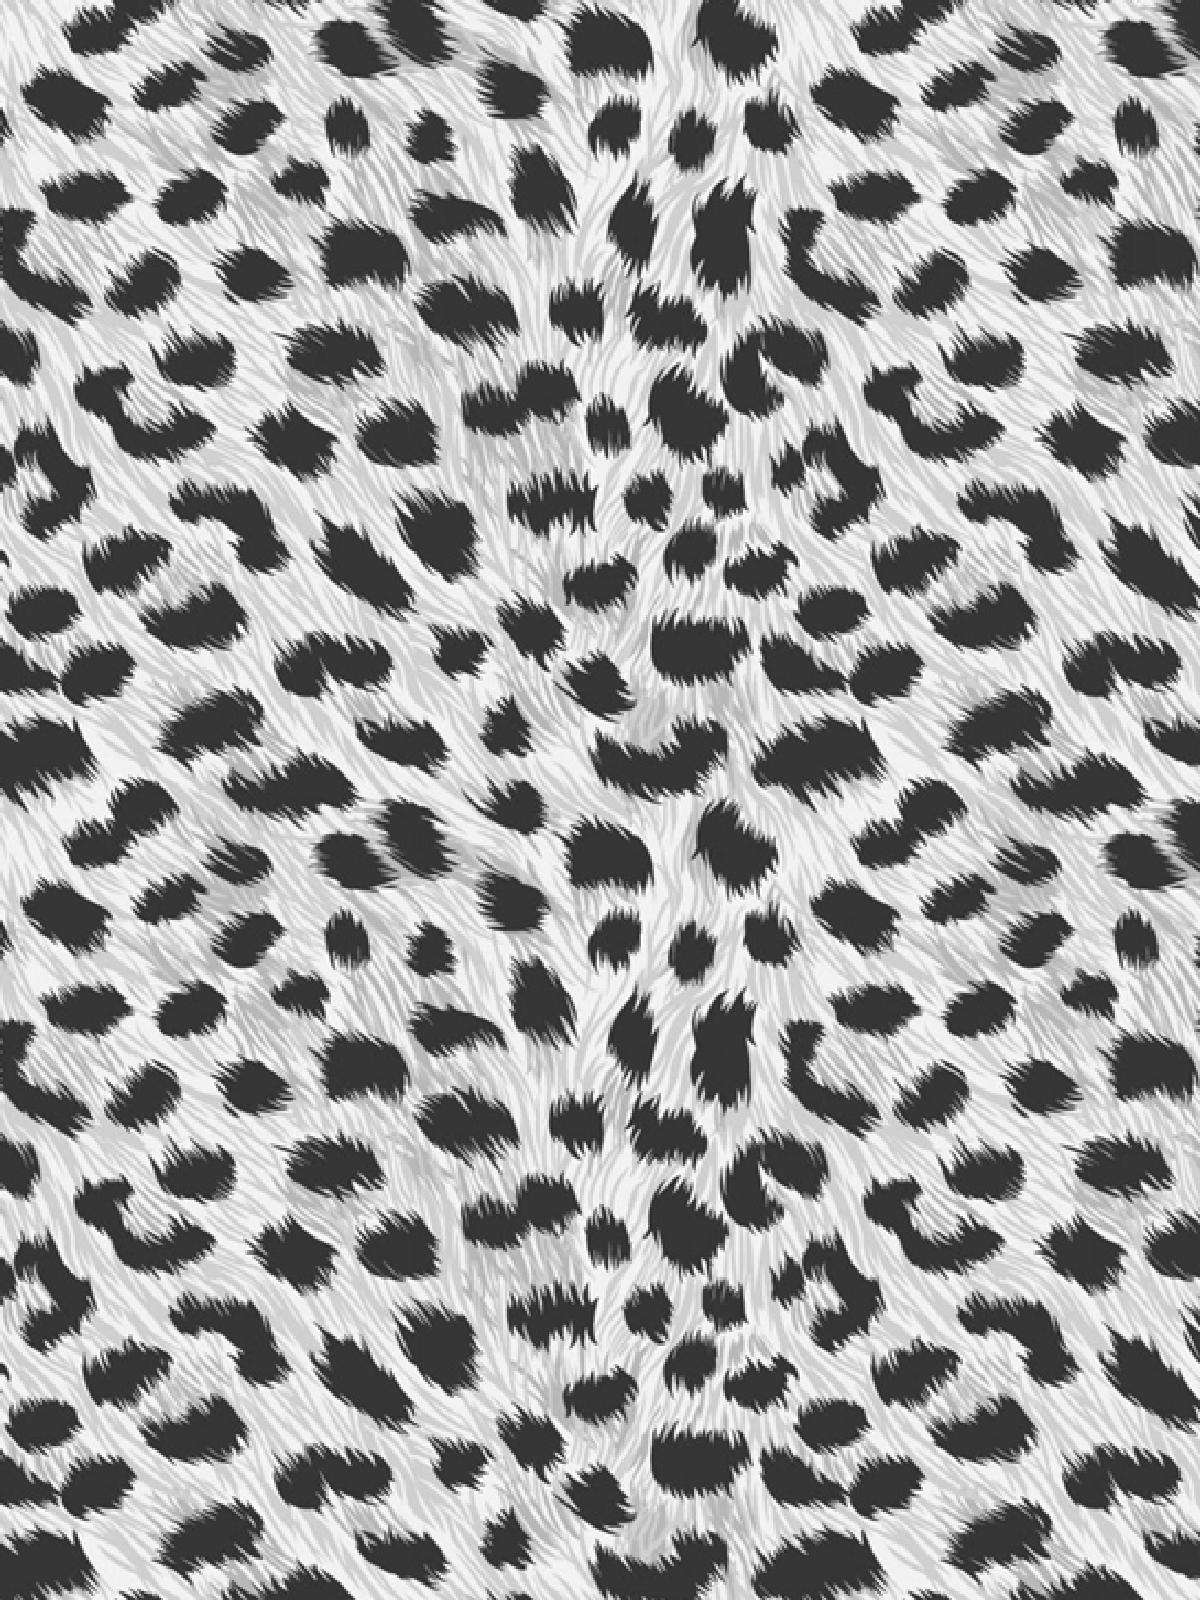 Free download Black And White Leopard Print Wallpaper Black And White